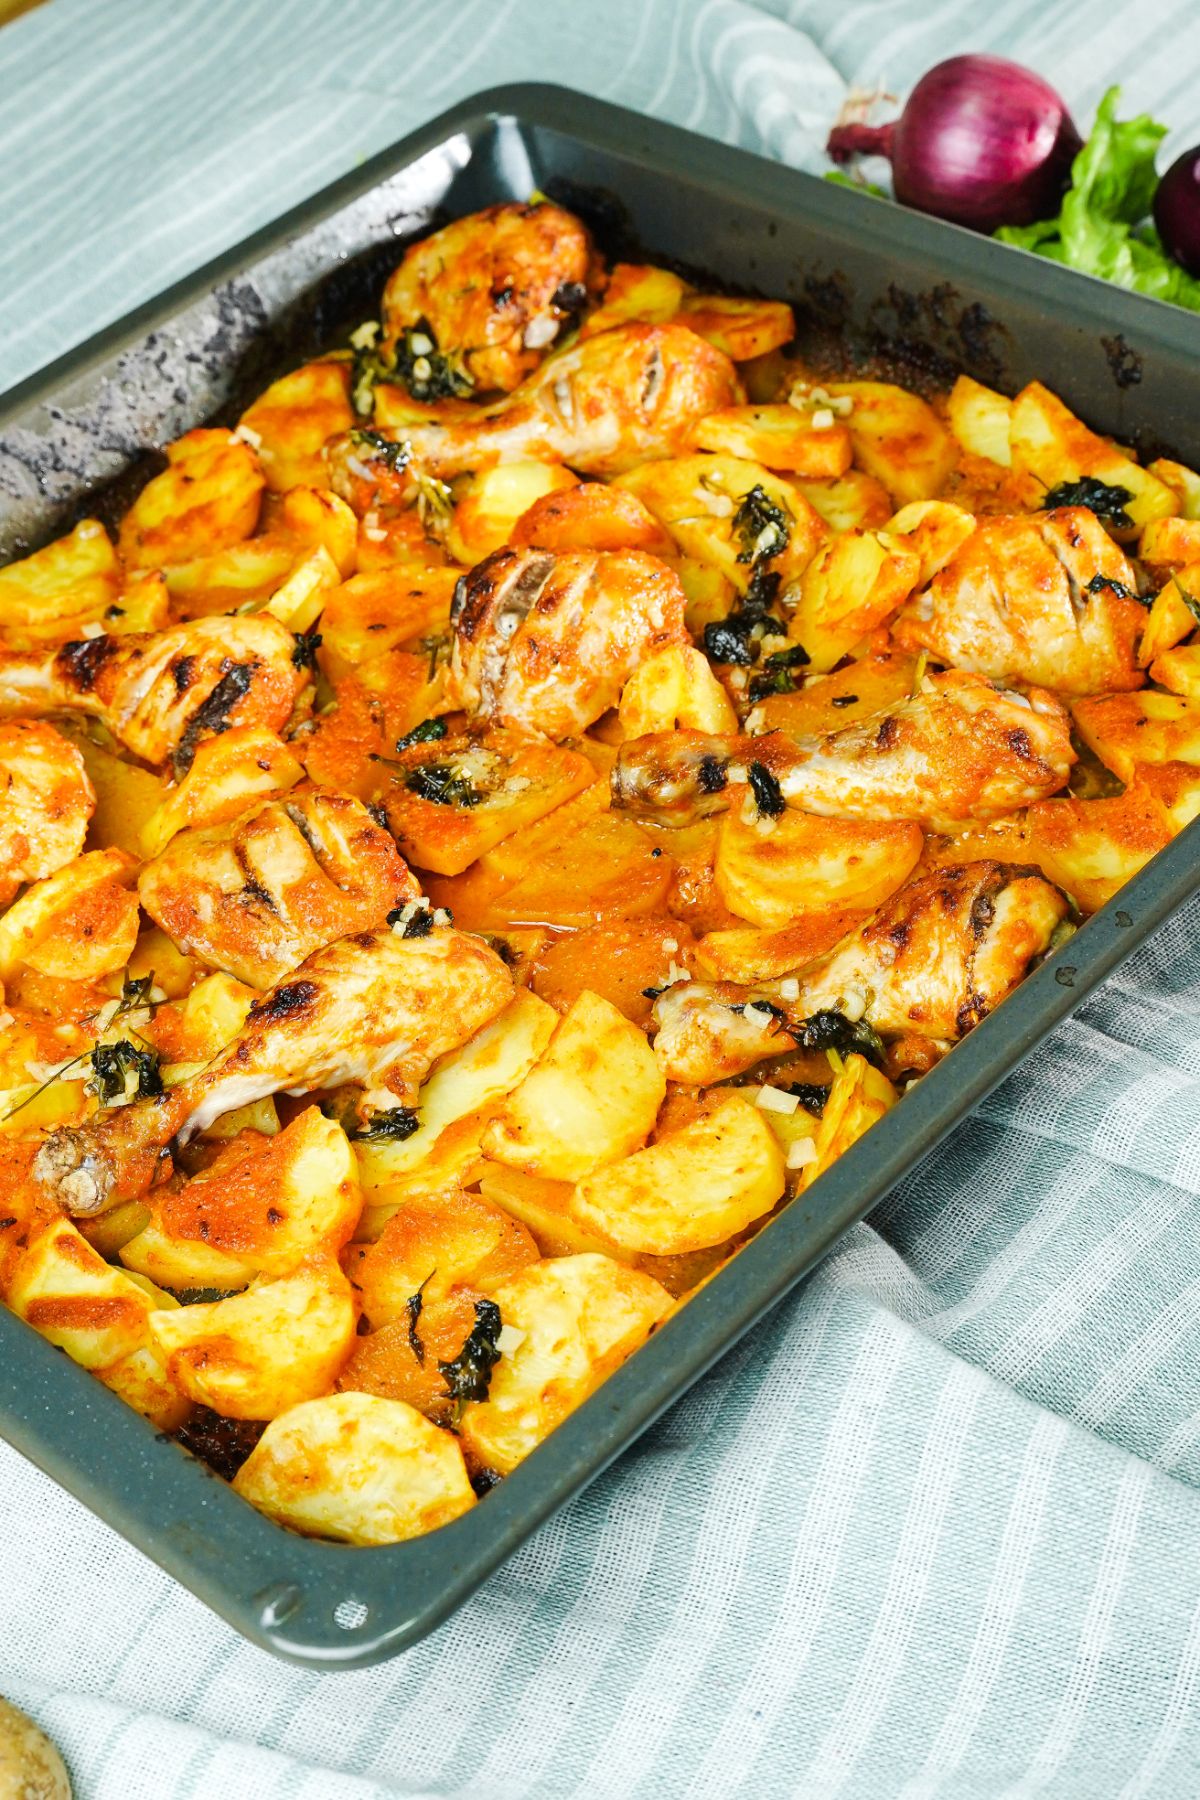 baking sheet of roasted chicken and potatoes laying on striped napkin